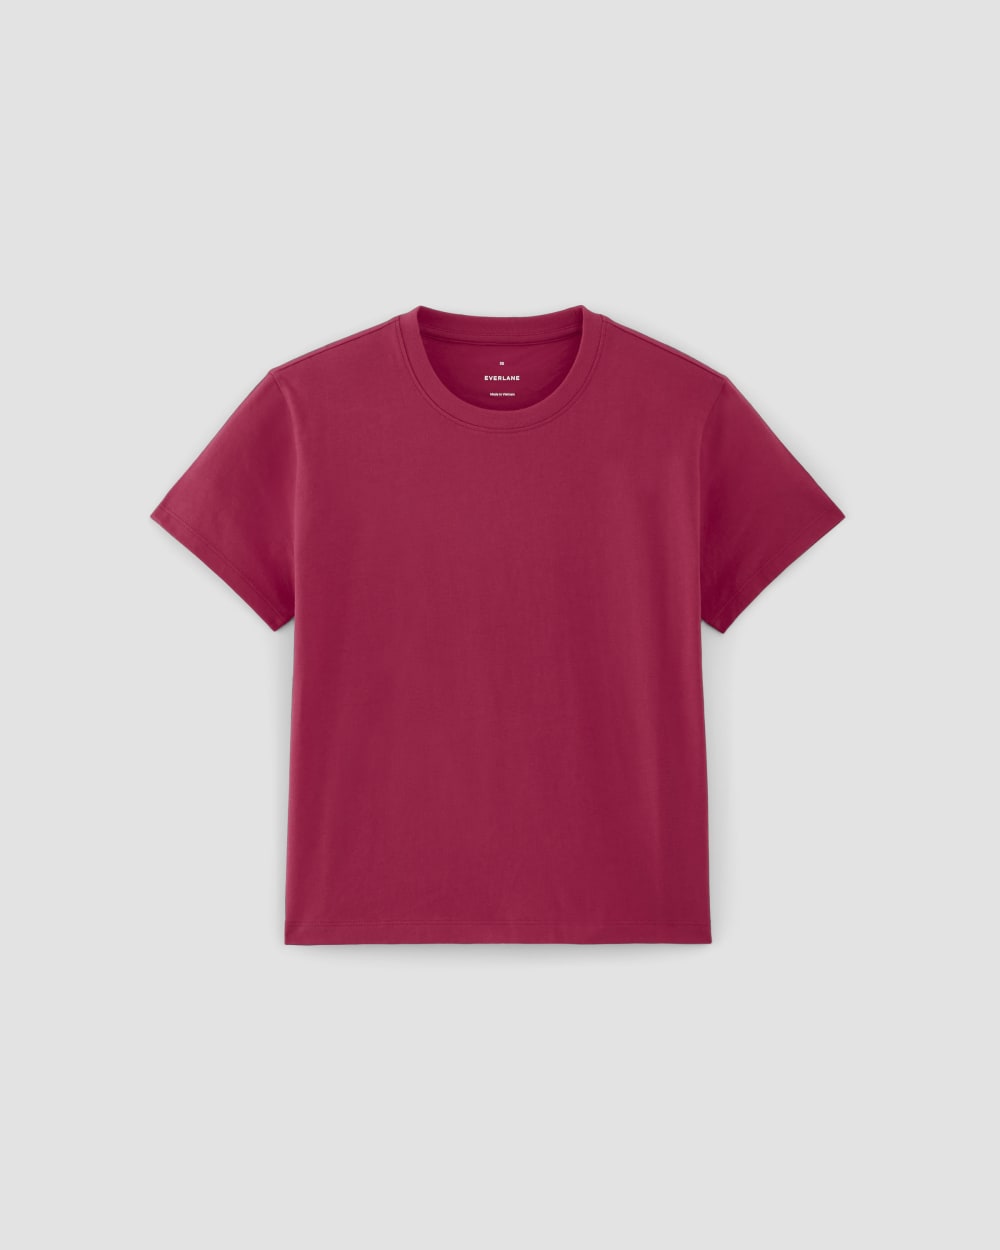 The Cotton High-Rise Hipster Burnt Sugar – Everlane